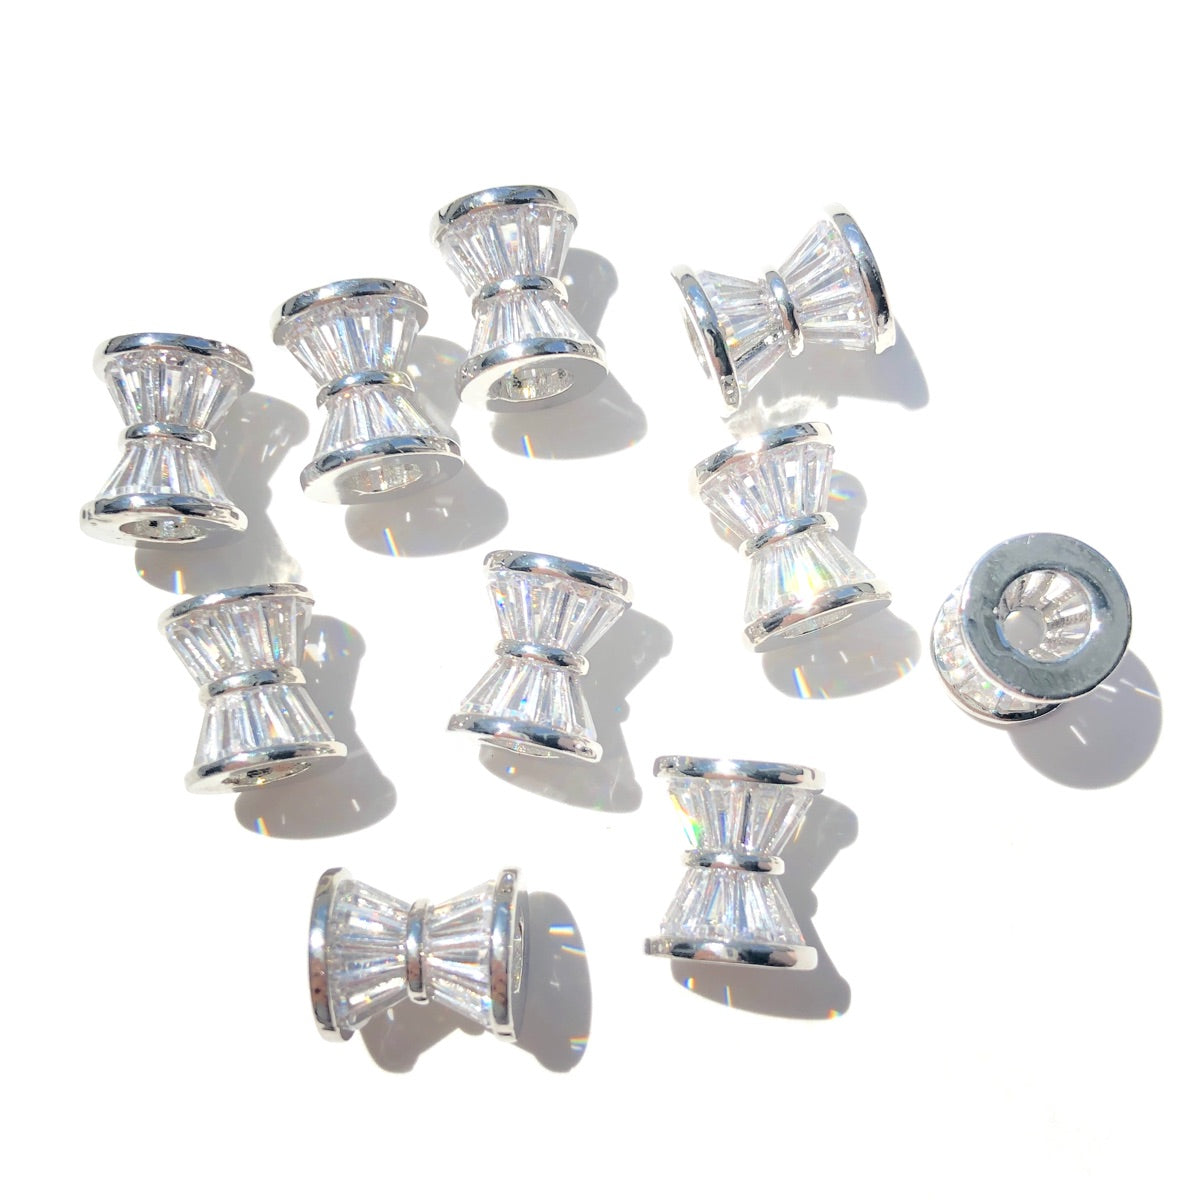 10-20-50pcs/lot 9.6*8.4mm CZ Paved Hourglass Spacers Silver CZ Paved Spacers Hourglass Beads New Spacers Arrivals Wholesale Charms Beads Beyond